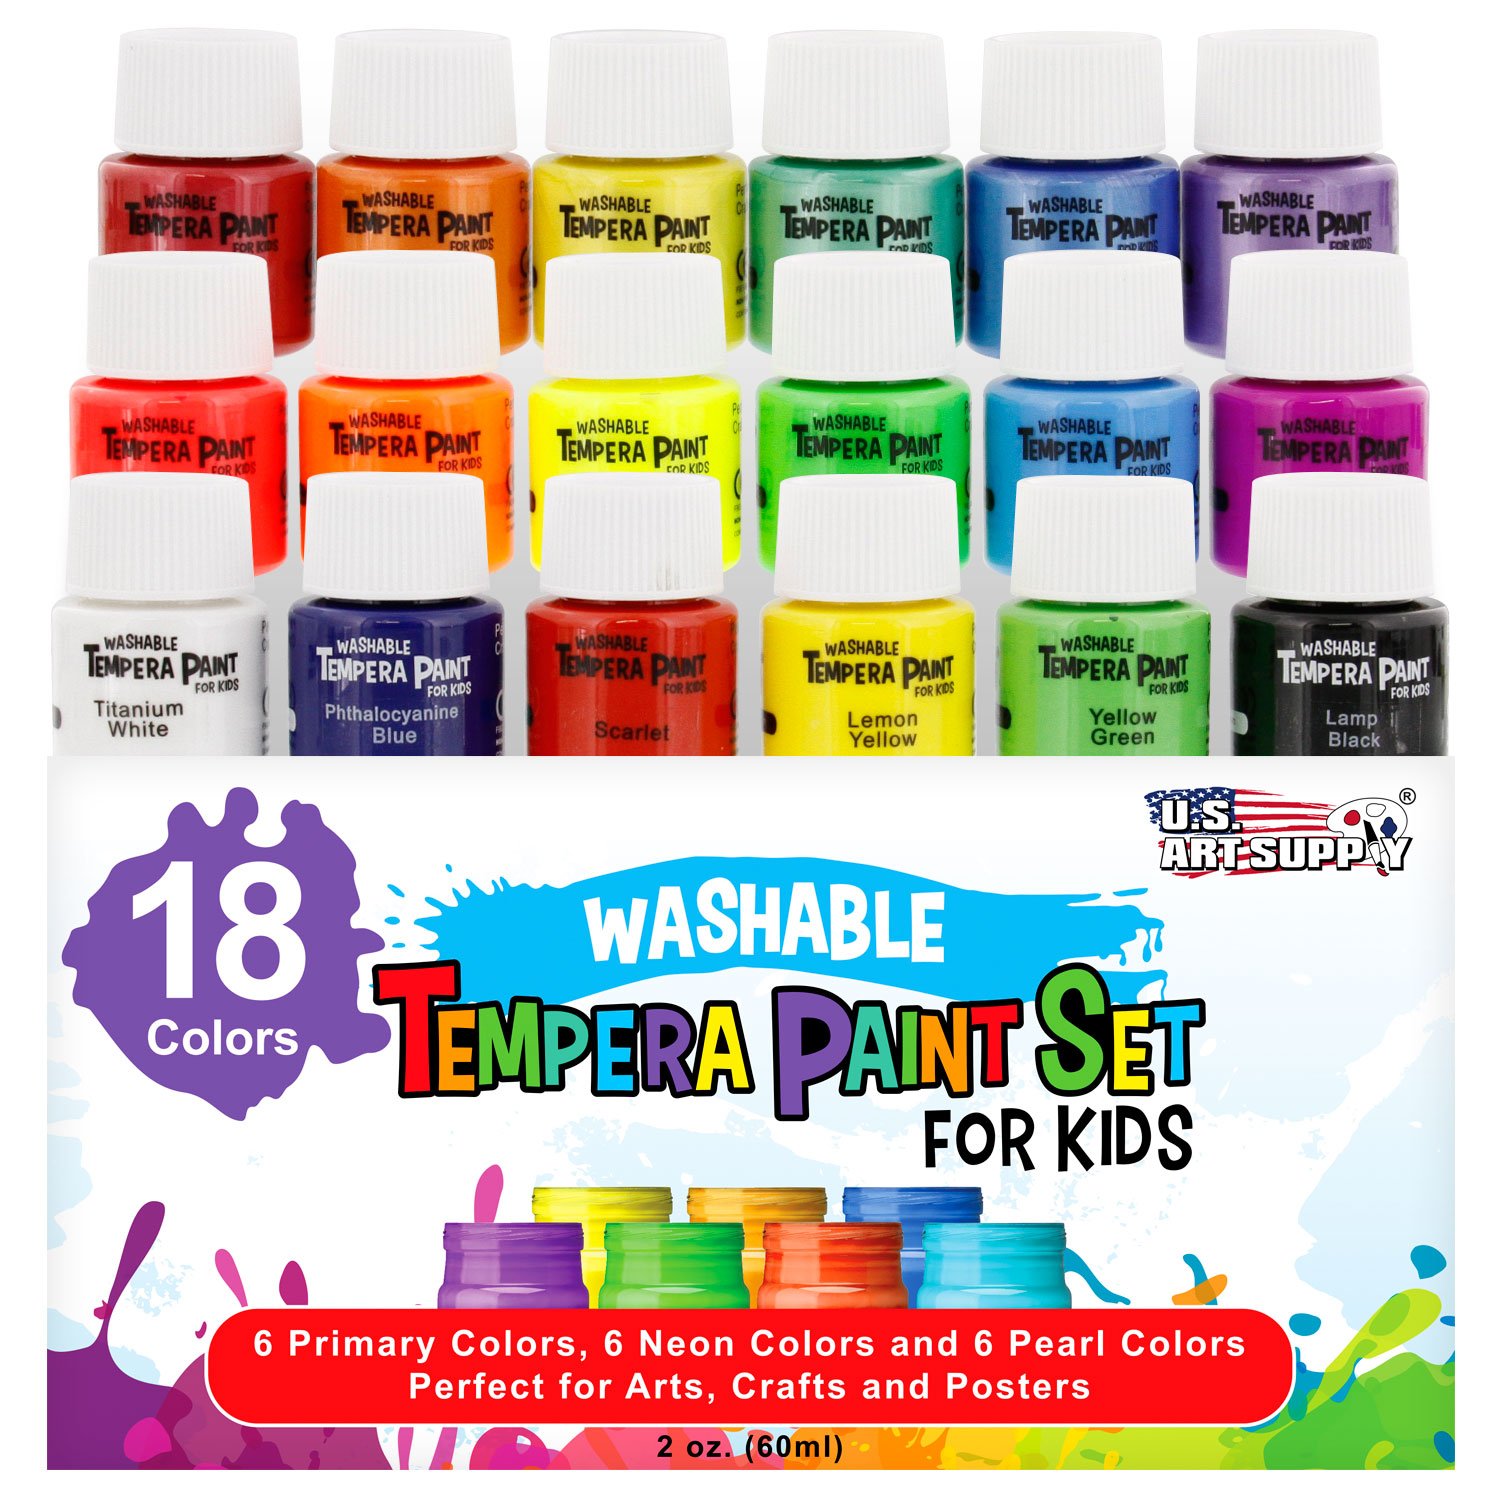 U.S. Art Supply Washable Tempera Paint For Kids, 18-Piece